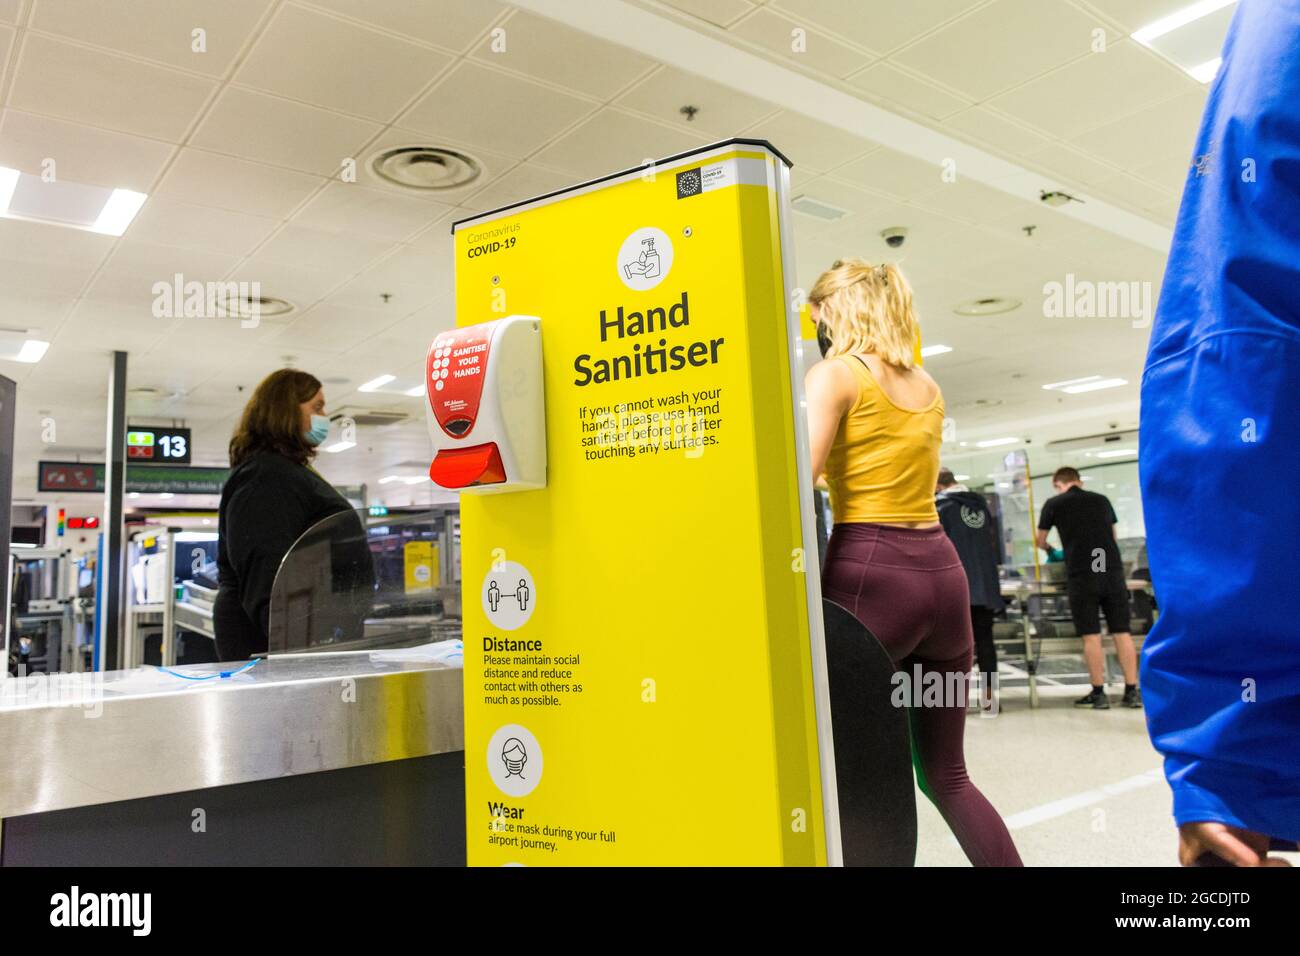 Dublin Airport departures security, Terminal One, Ireland. Masks wearing and hand sanitiser unit during Covid19 pandemic. Stock Photo